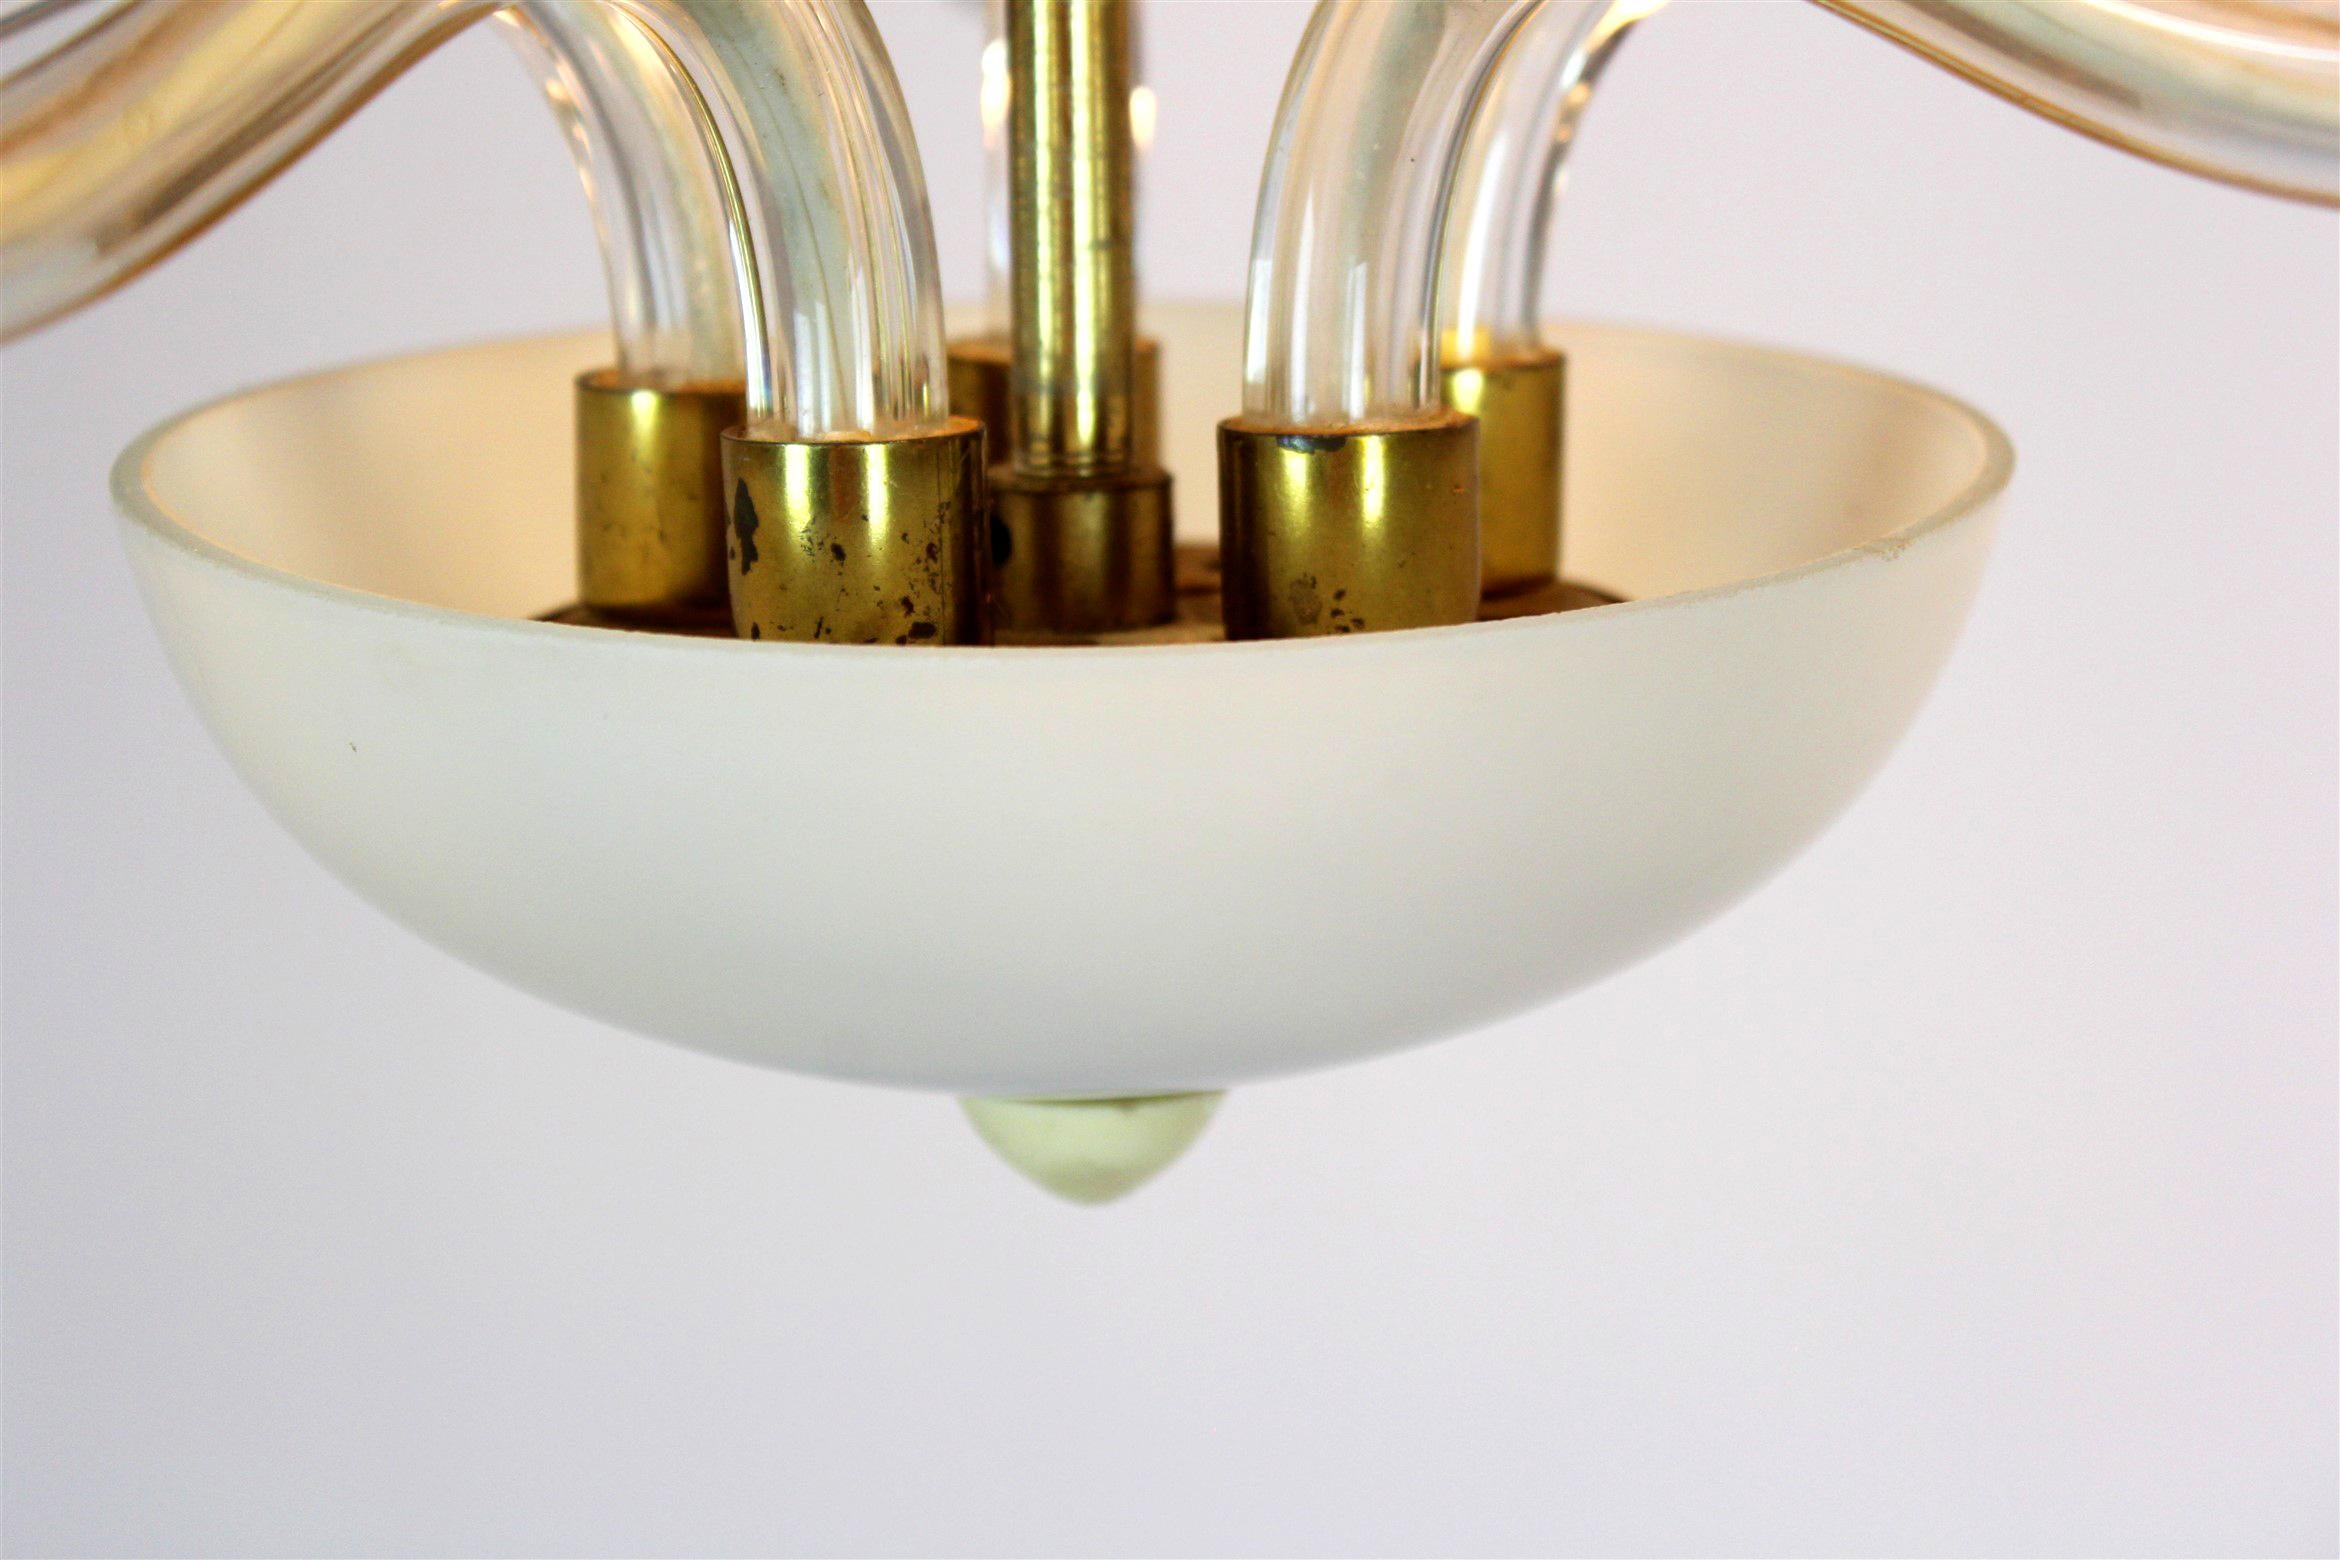 
This Mid-Century Modern ceiling lamp was produced in the 1960's in Czechoslovakia. It is made of steel and glass, the lamp arms are made of bent glass tubes.